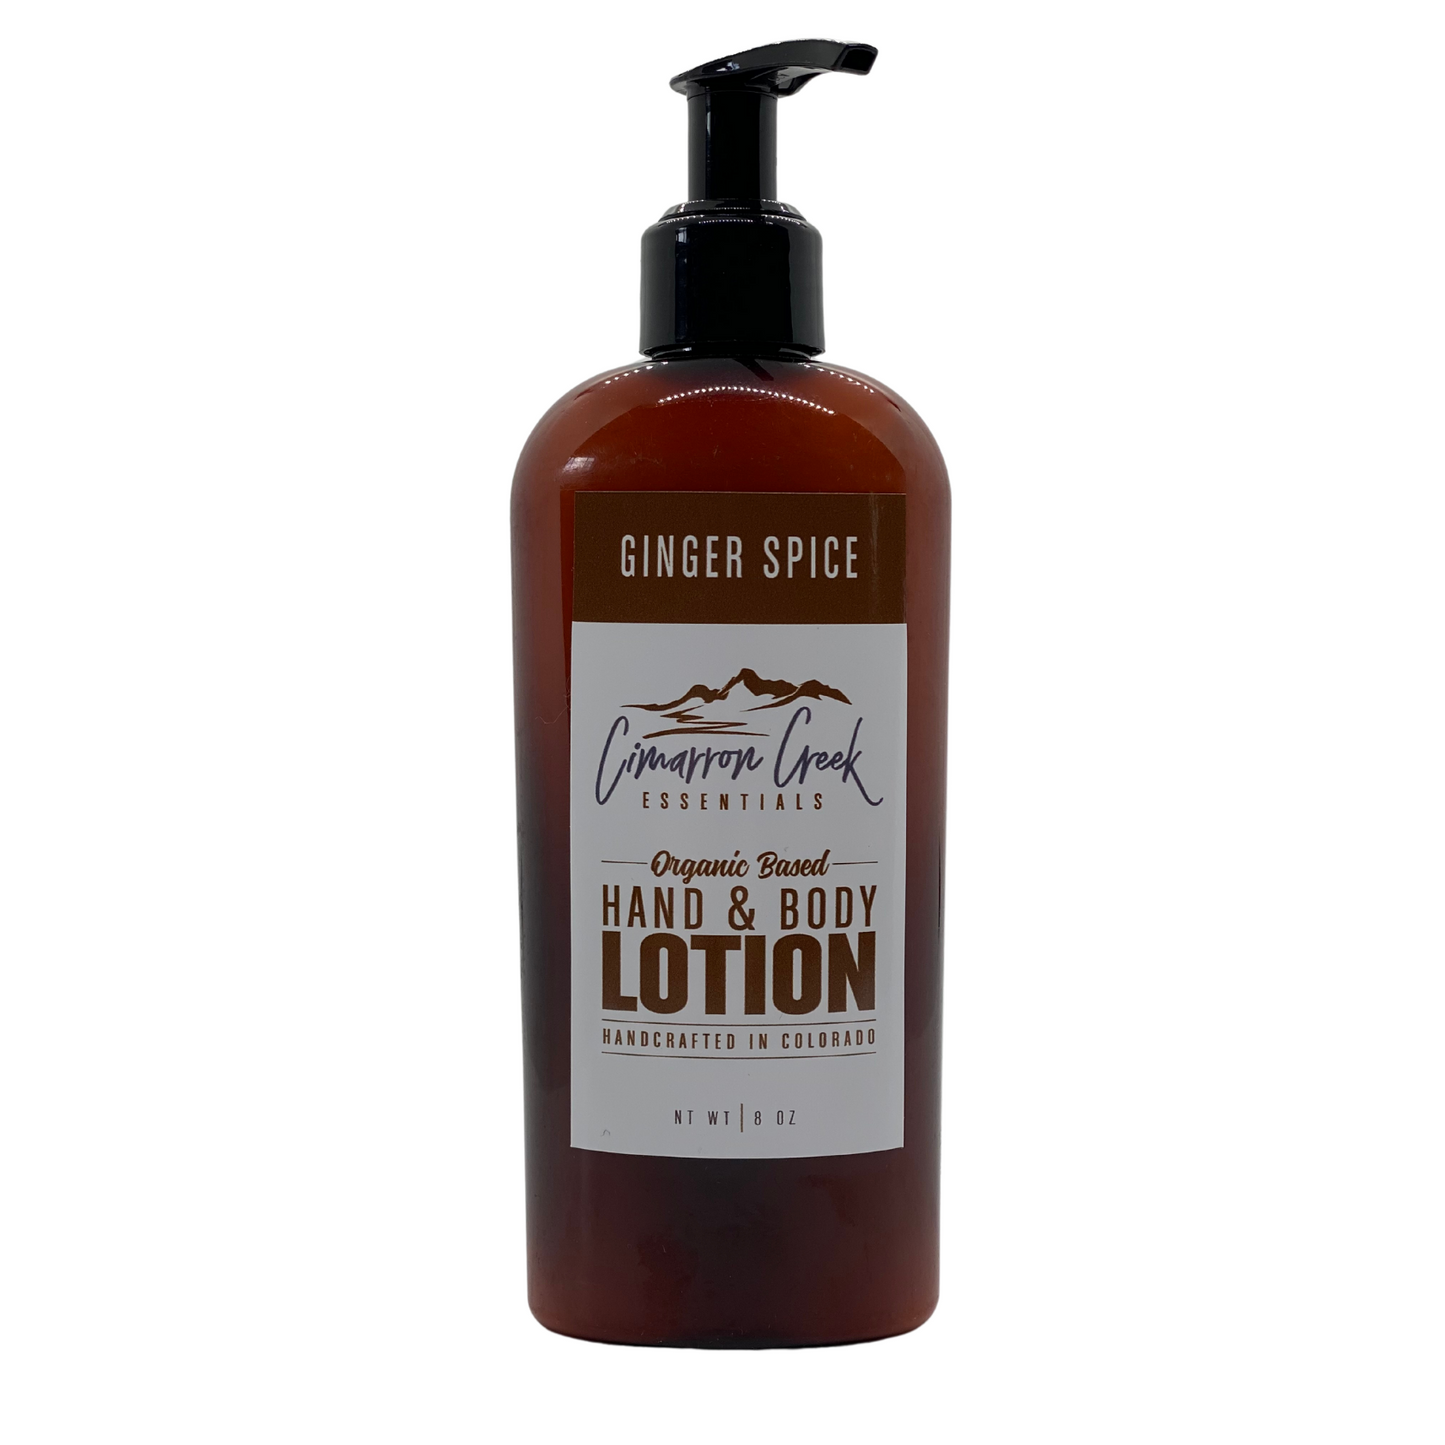 Ginger Spice Organic Hand & Body Lotion